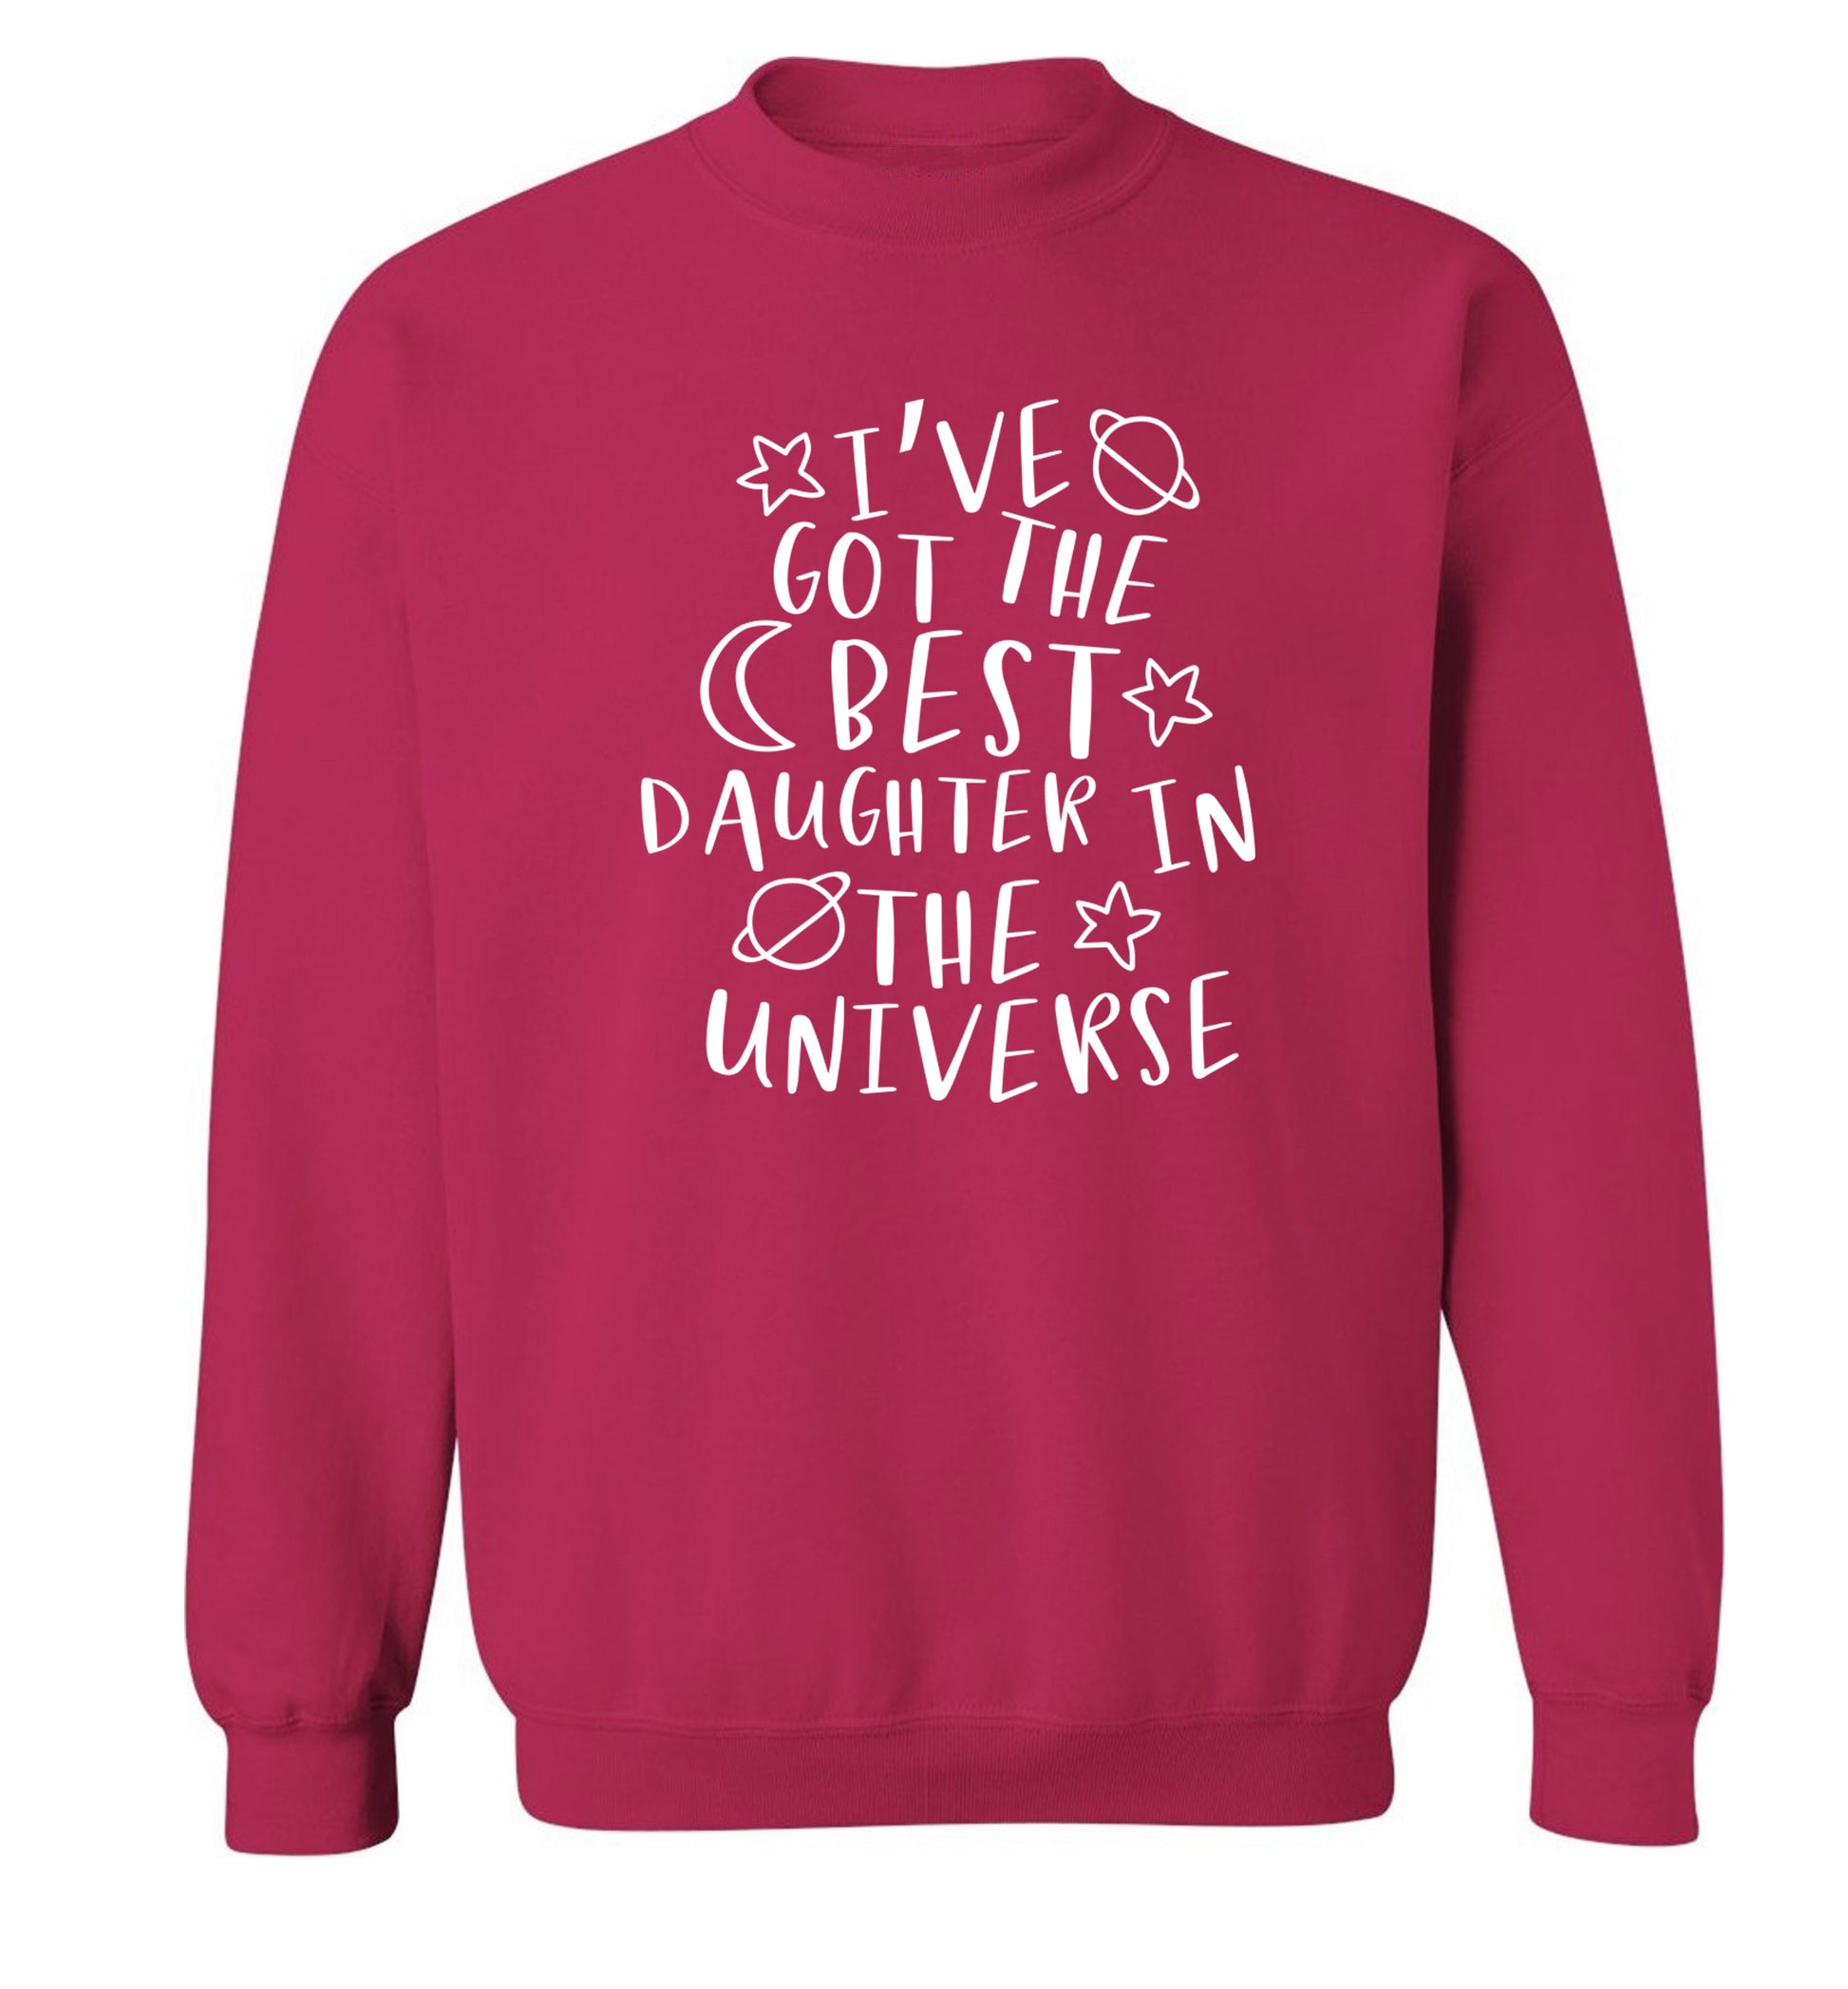 I've got the best daughter in the universe Adult's unisex pink Sweater 2XL